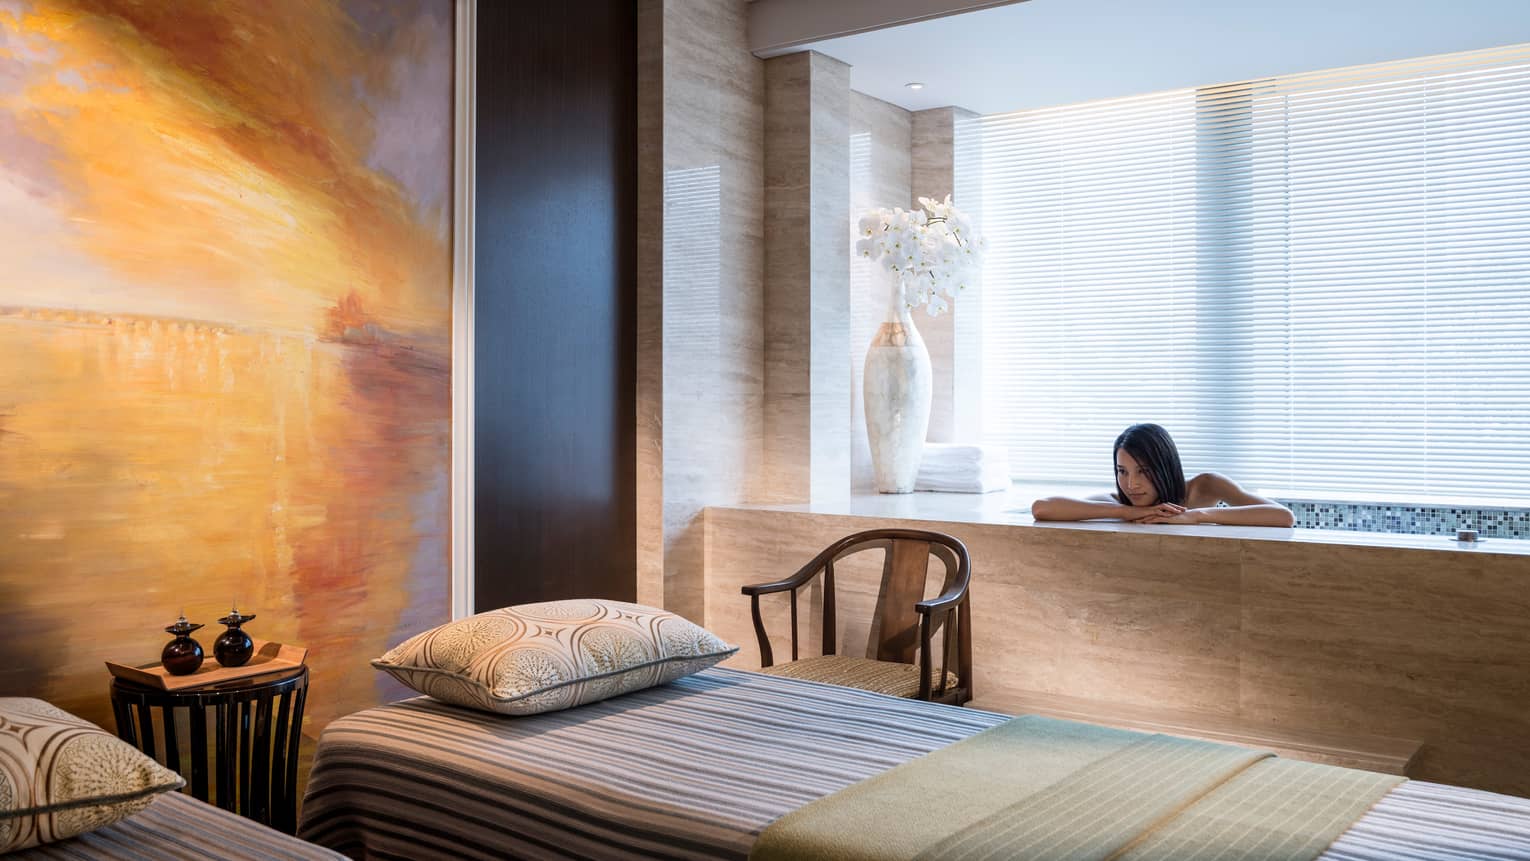 Woman rests head, arms on Spa tub beside massage table